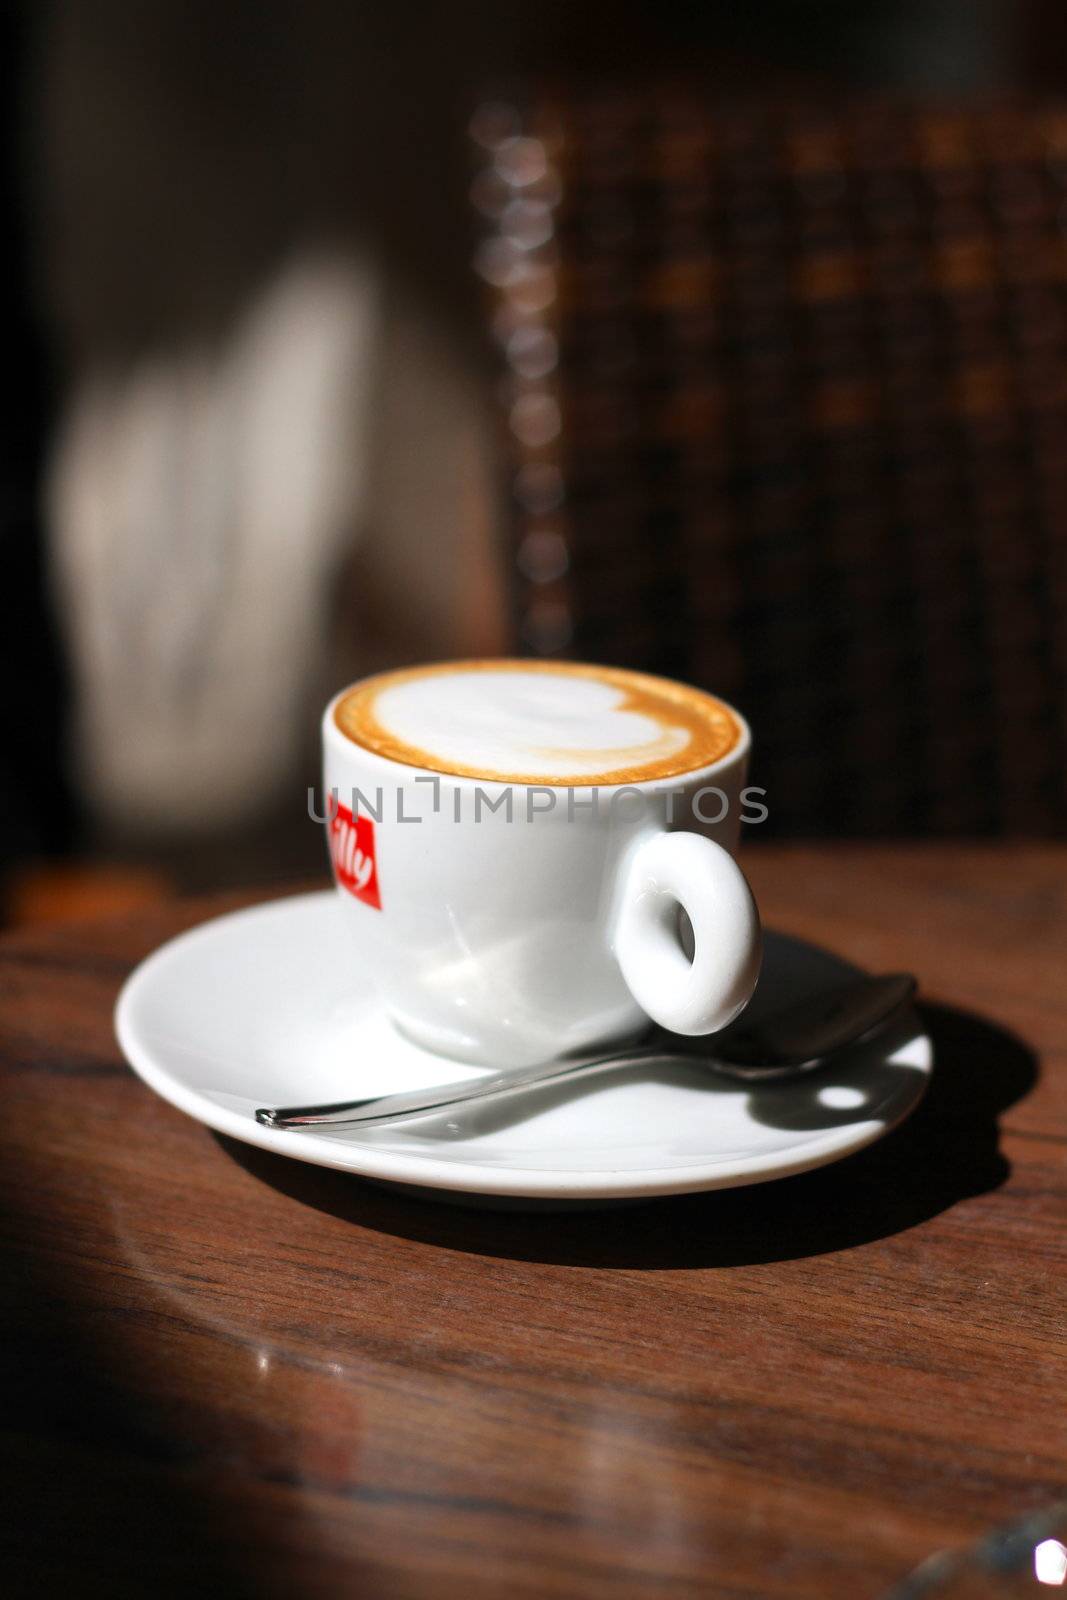 Illy coffee cup by lifeinapixel